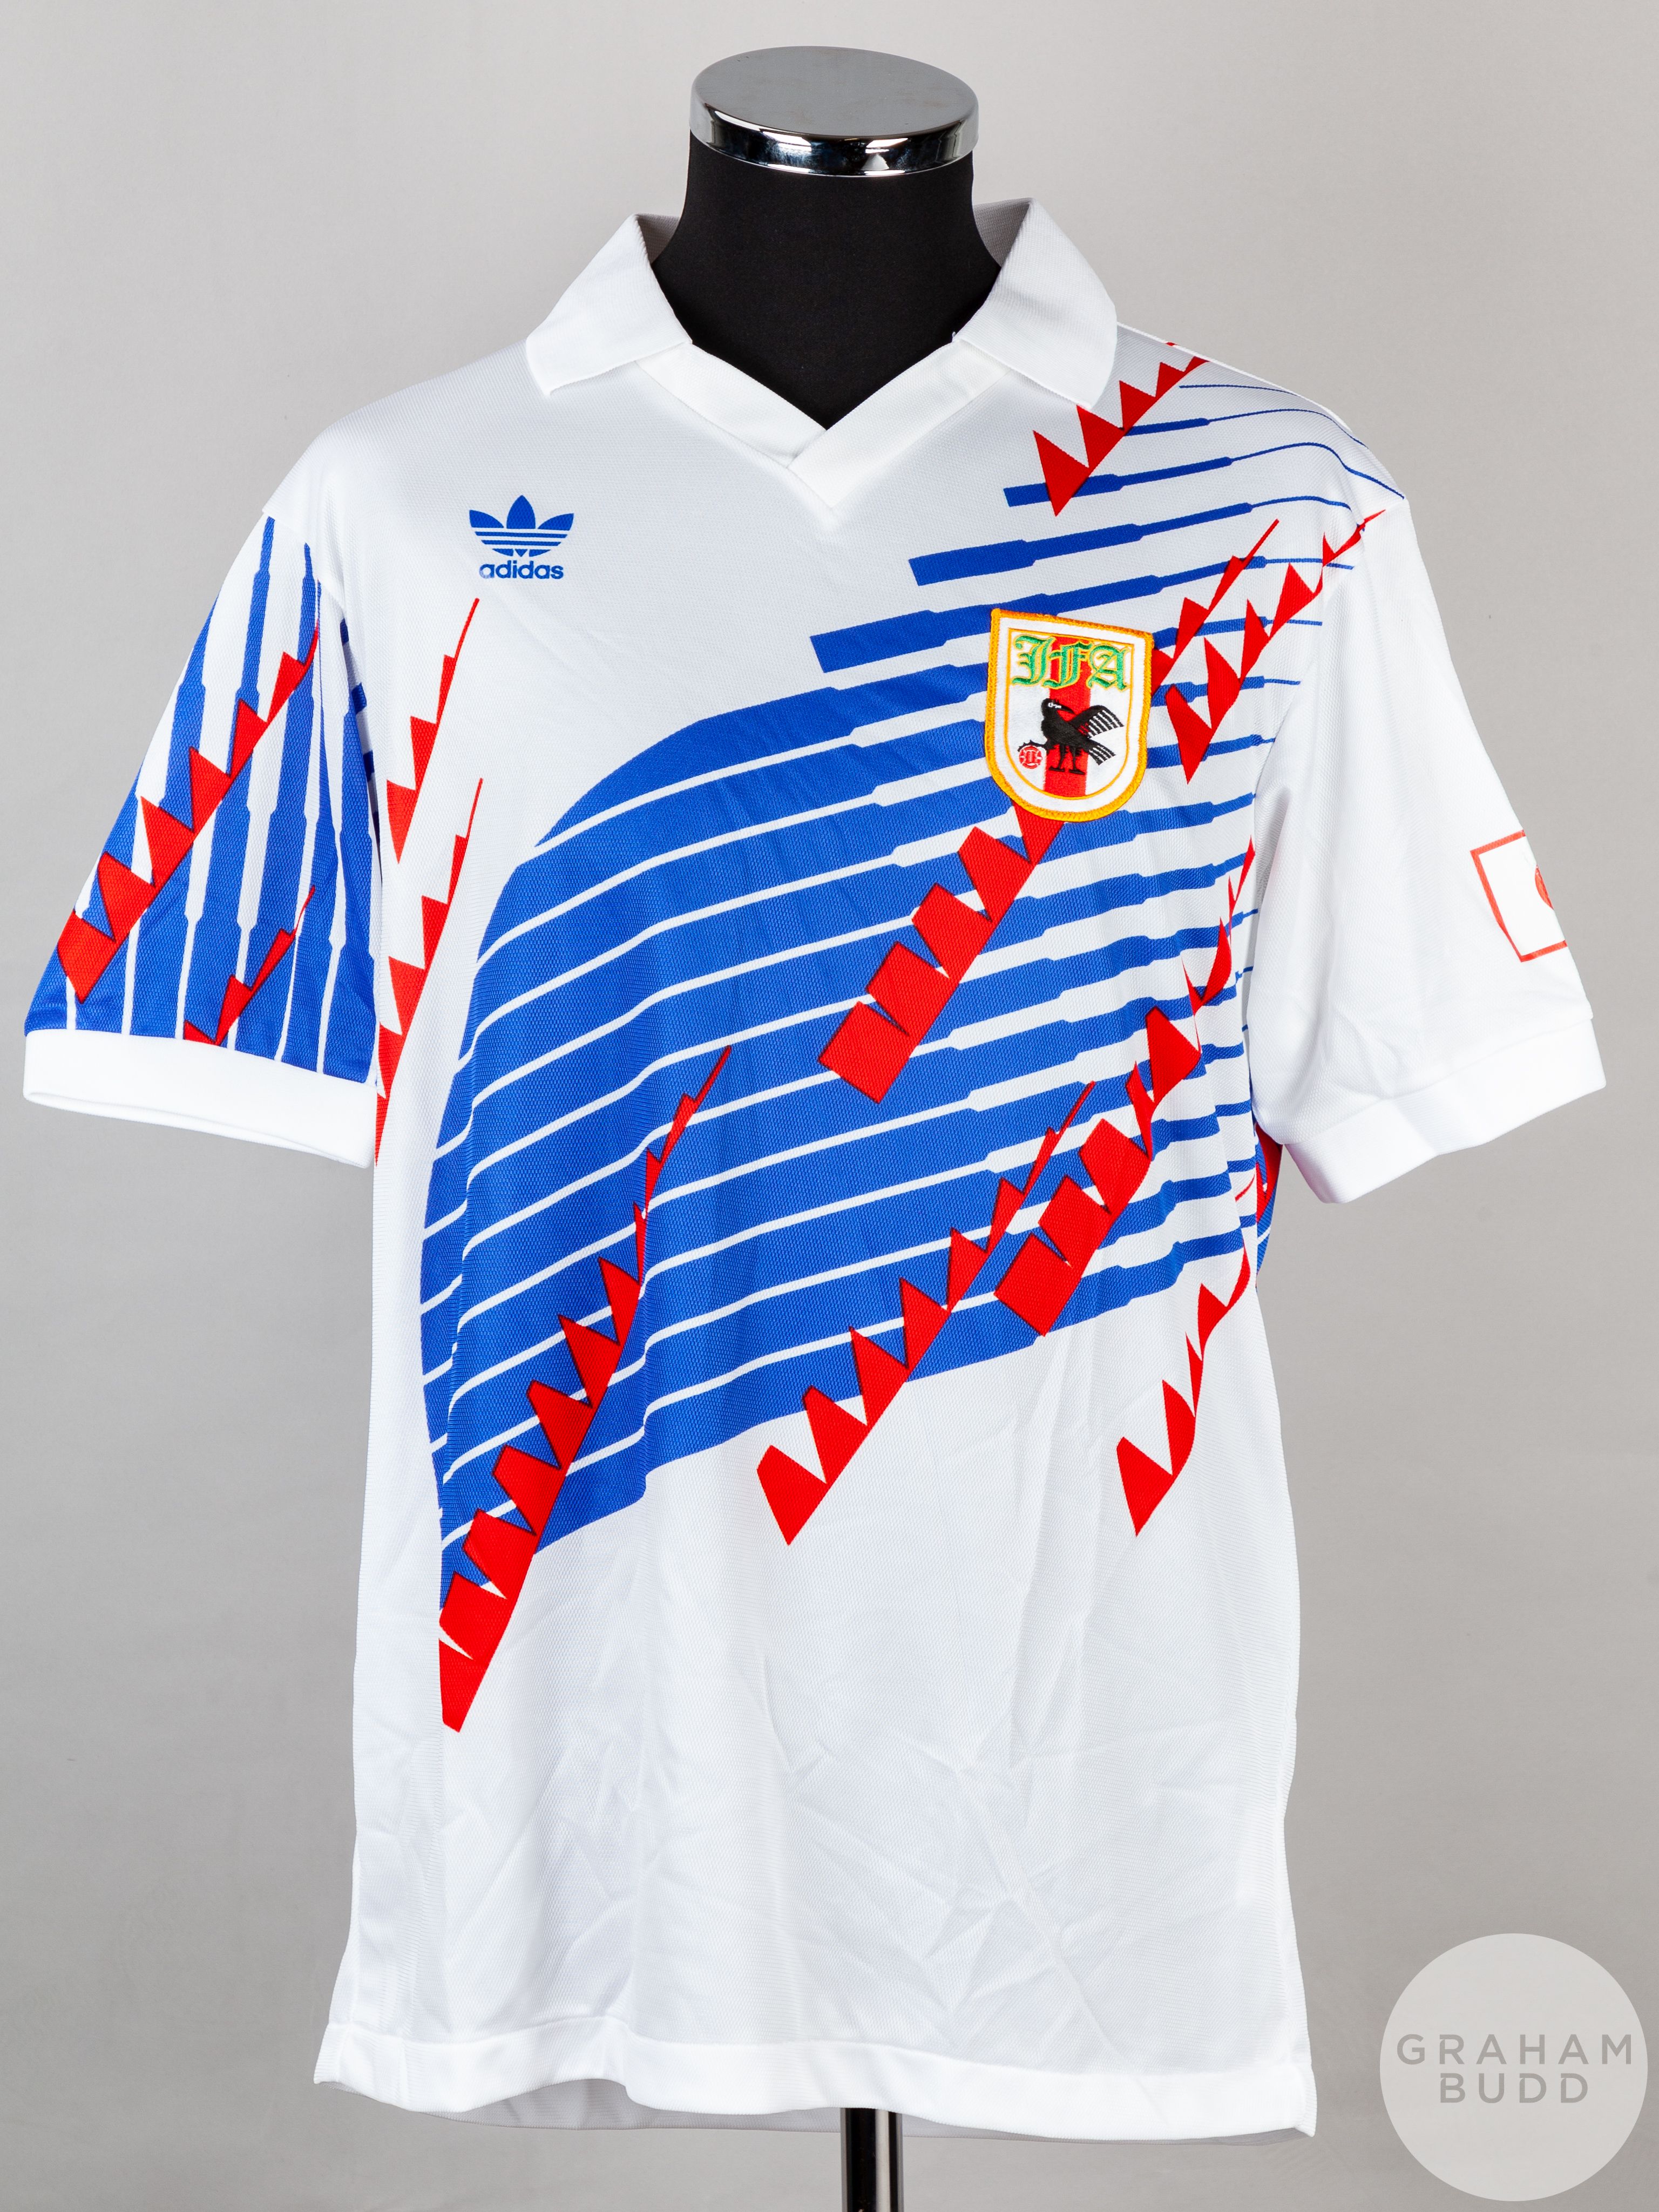 White, red and blue un-numbered Japan short-sleeved shirt, 1990s